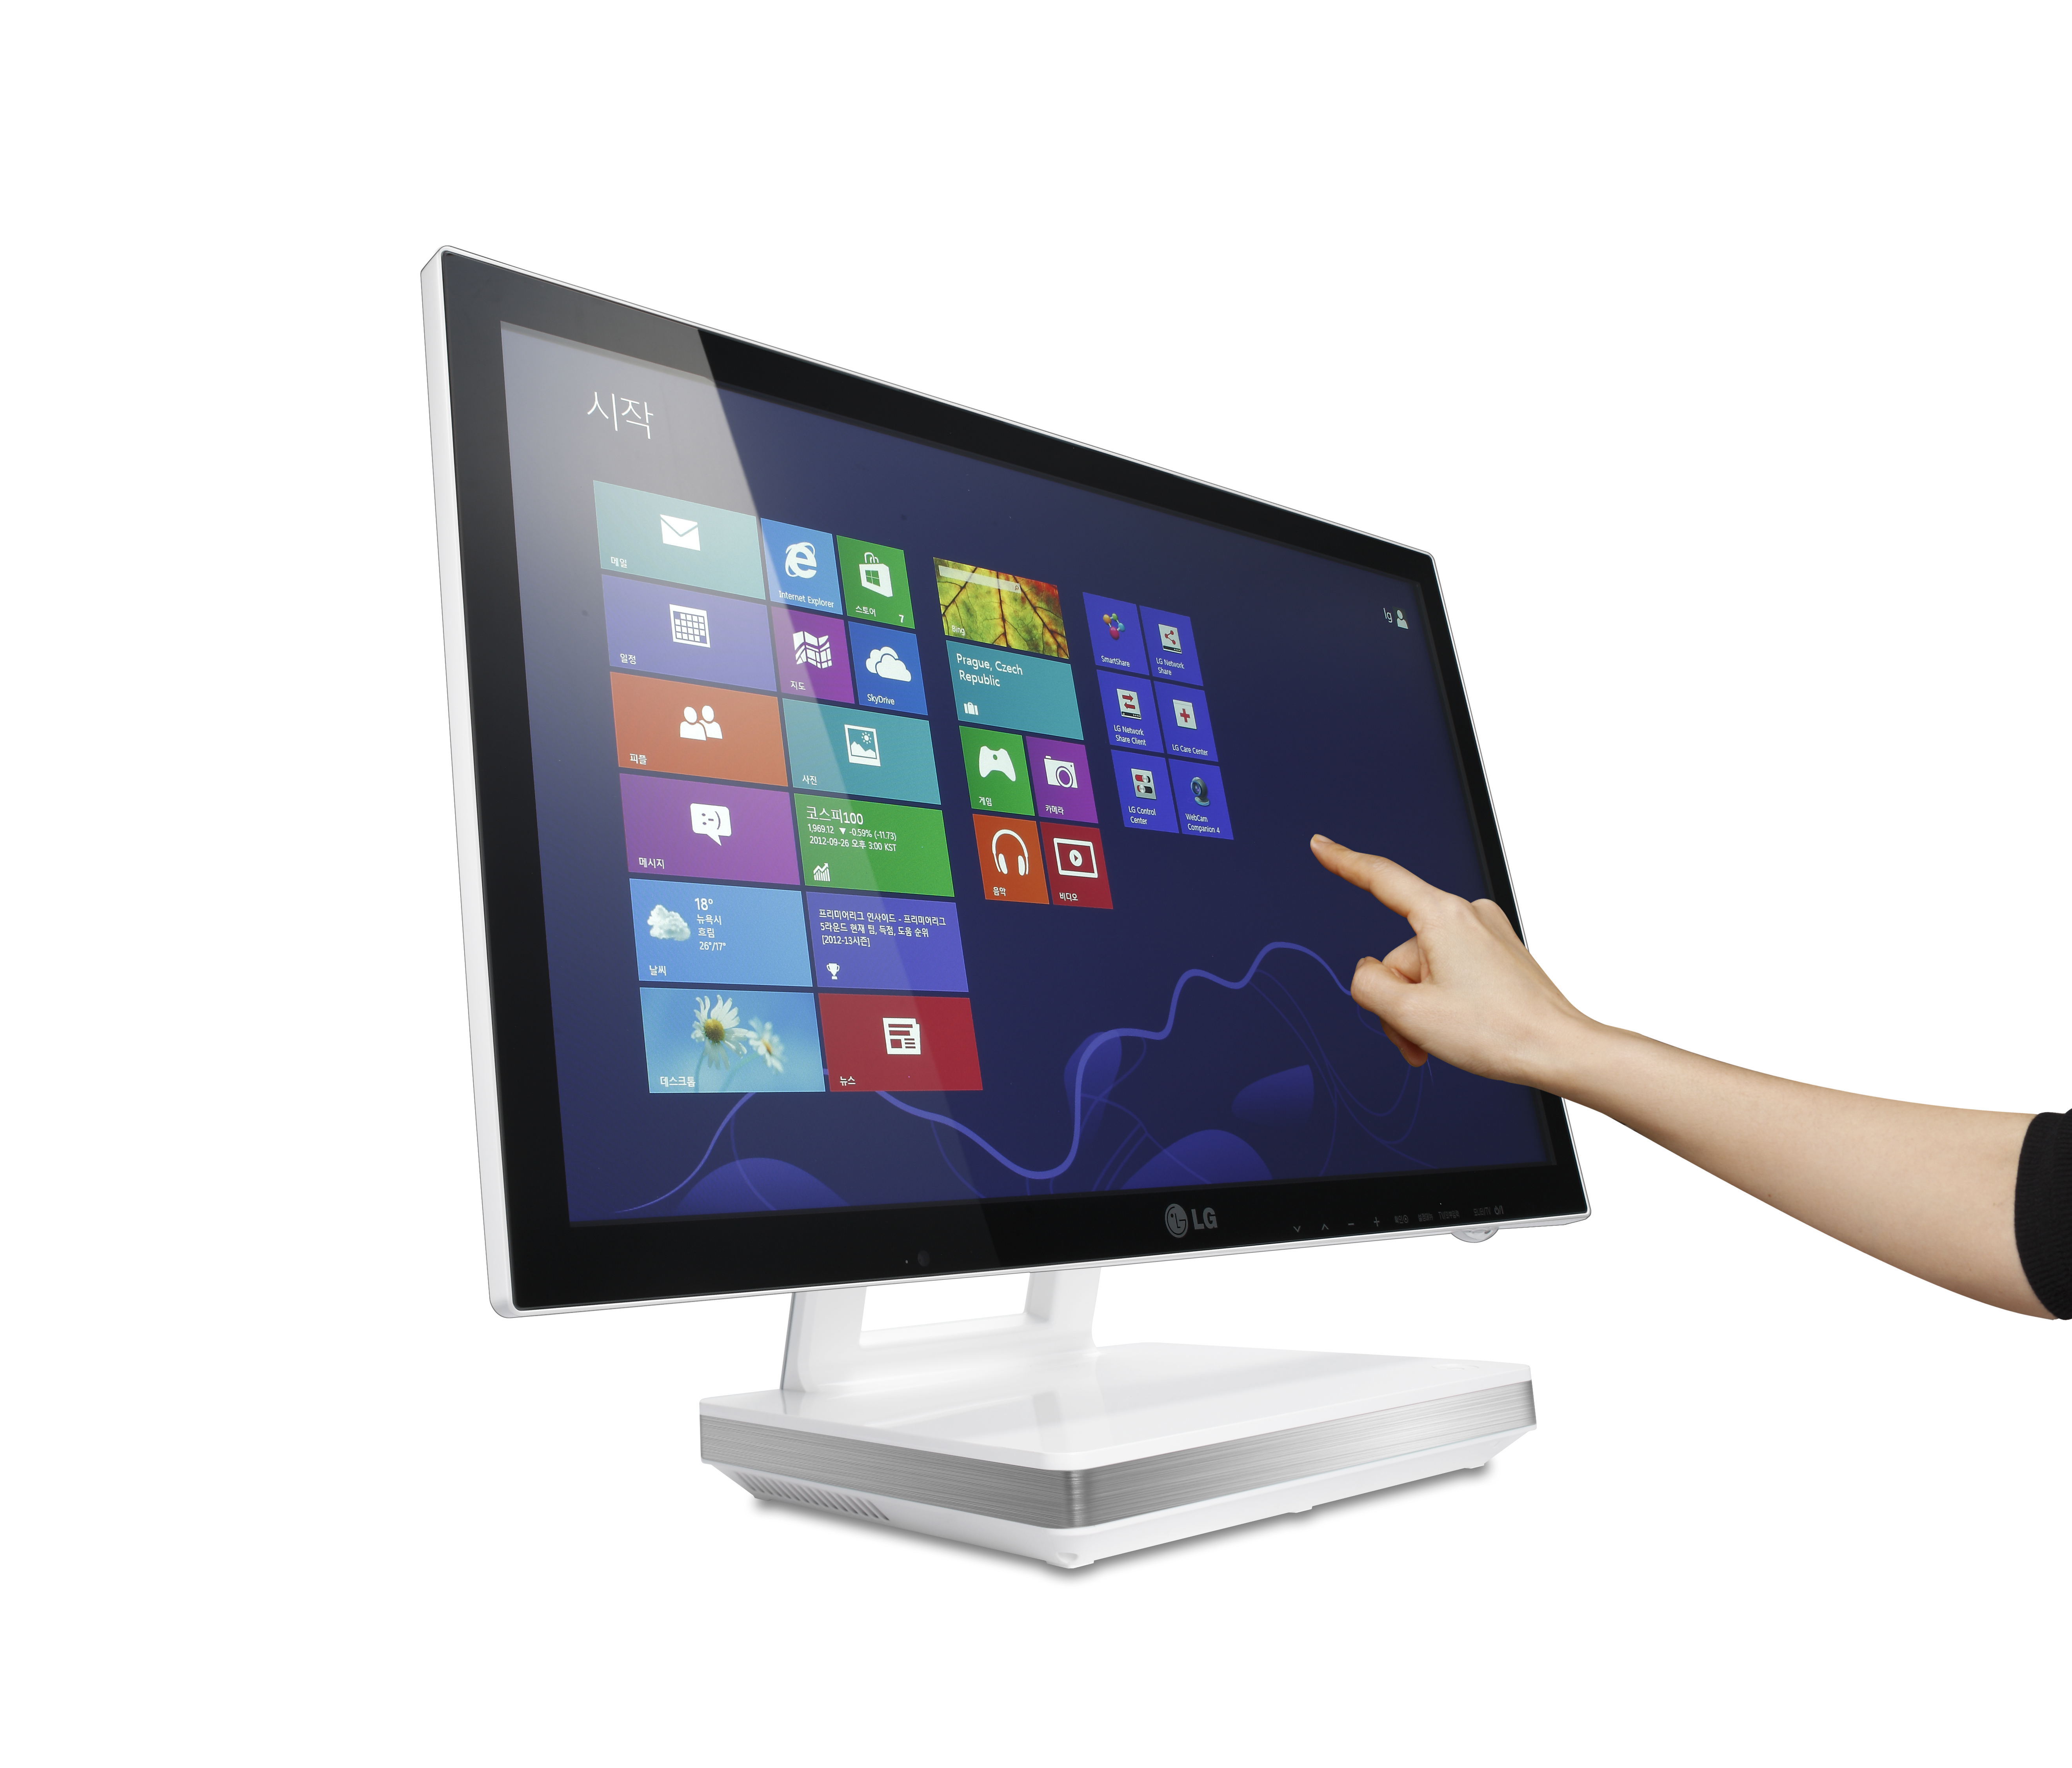 The LG All-In-One PC model V325’s display being interacted with by someone’s hand